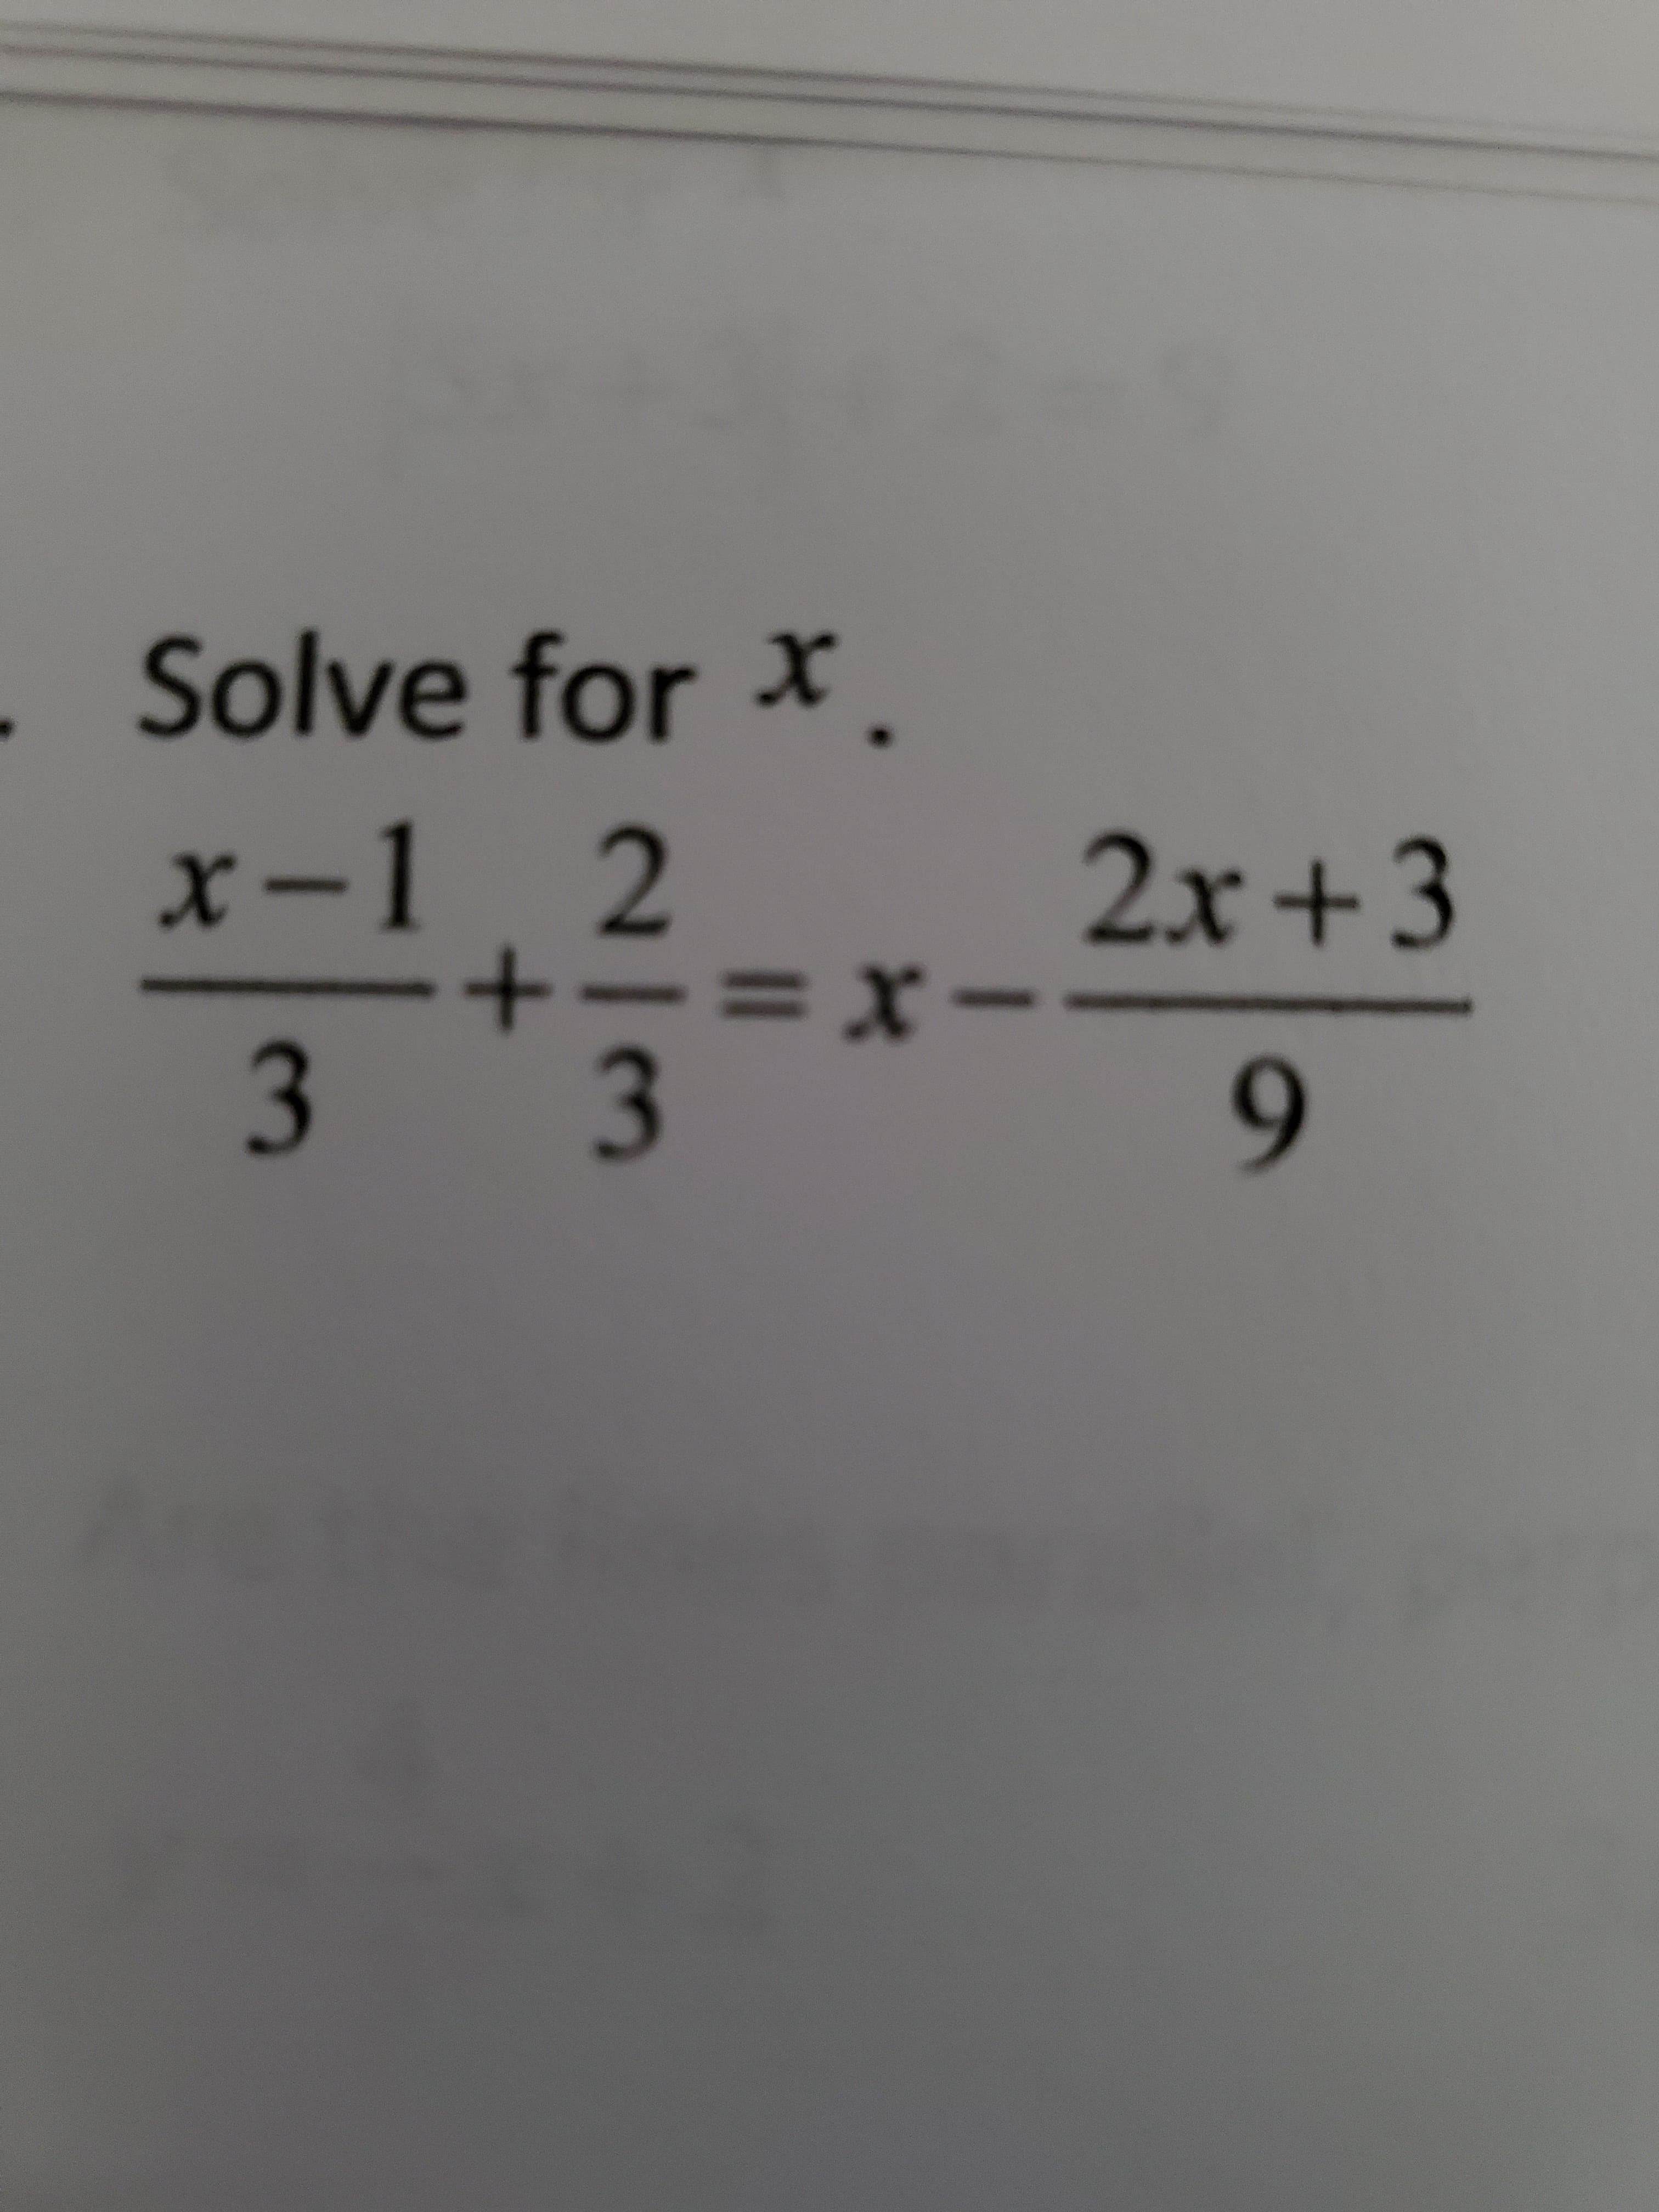 Solve for *.
x-1 2
2x+3
=x-
3
9.
/3
